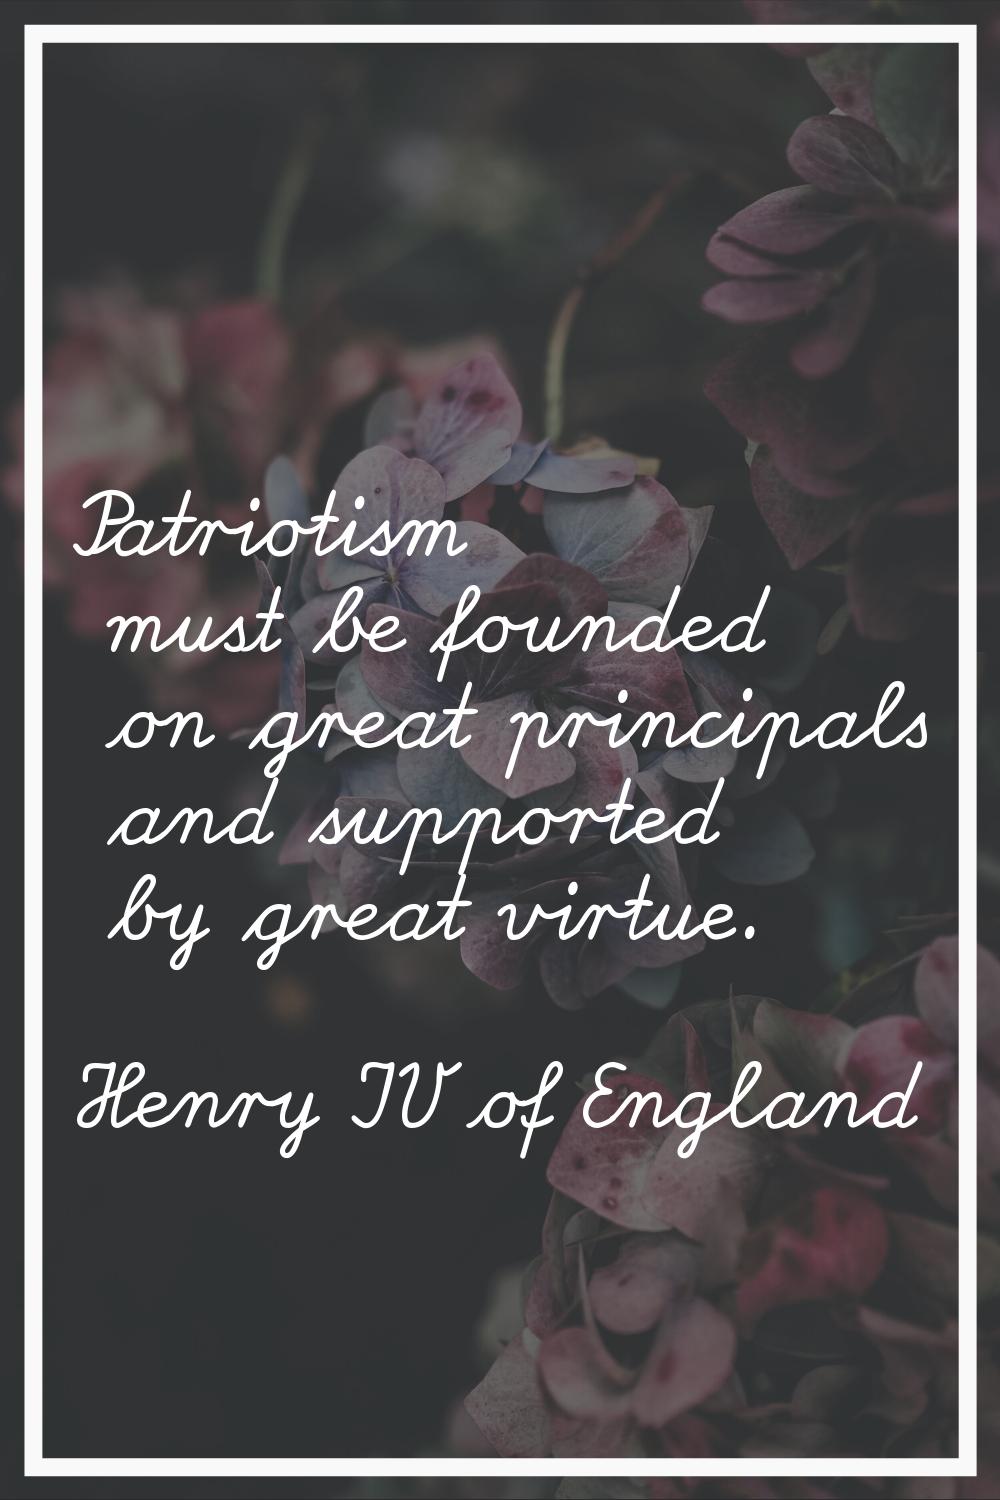 Patriotism must be founded on great principals and supported by great virtue.